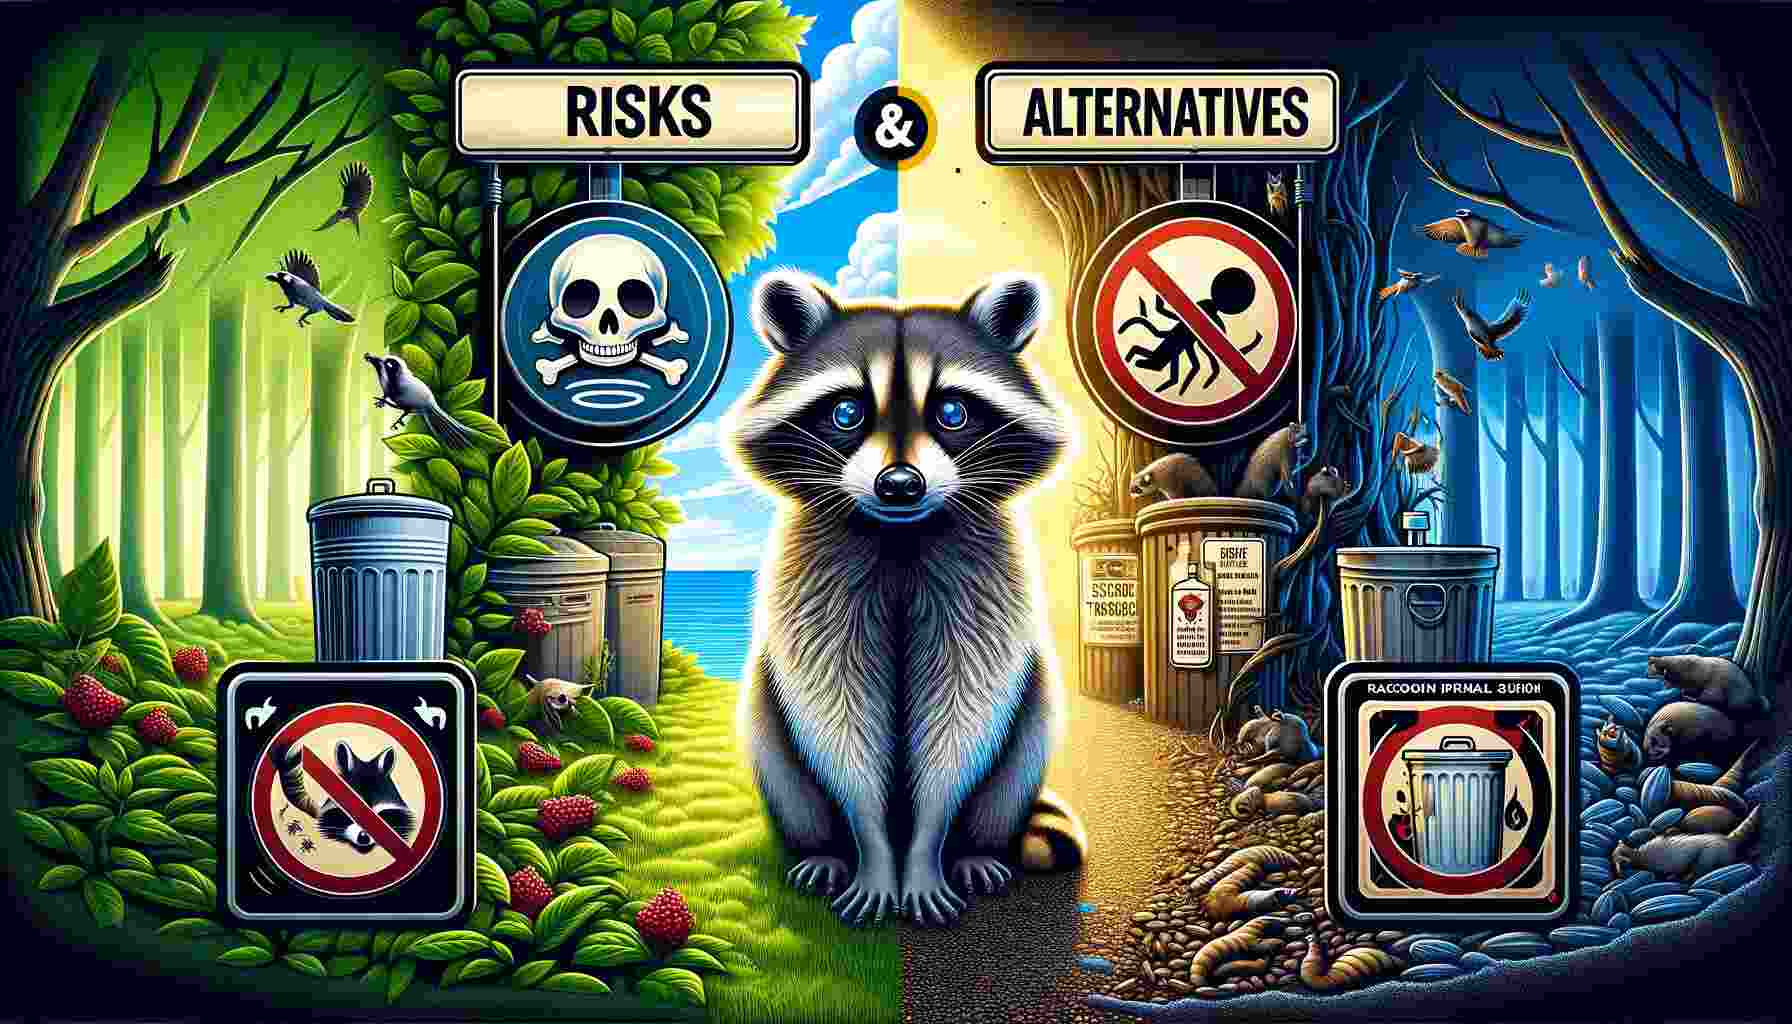 A split-scene image showcasing the contrast between wildlife preservation and the risks of using poison. On the left, a healthy raccoon explores a lush, natural environment, symbolizing the importance of protecting wildlife. On the right, visual warning symbols, including a skull and crossbones, caution against the use of poison, while icons of secure trash cans and wildlife-friendly deterrents offer safer alternatives. The image serves as a call to action for humane solutions to human-wildlife conflicts, emphasizing caution and responsibility.